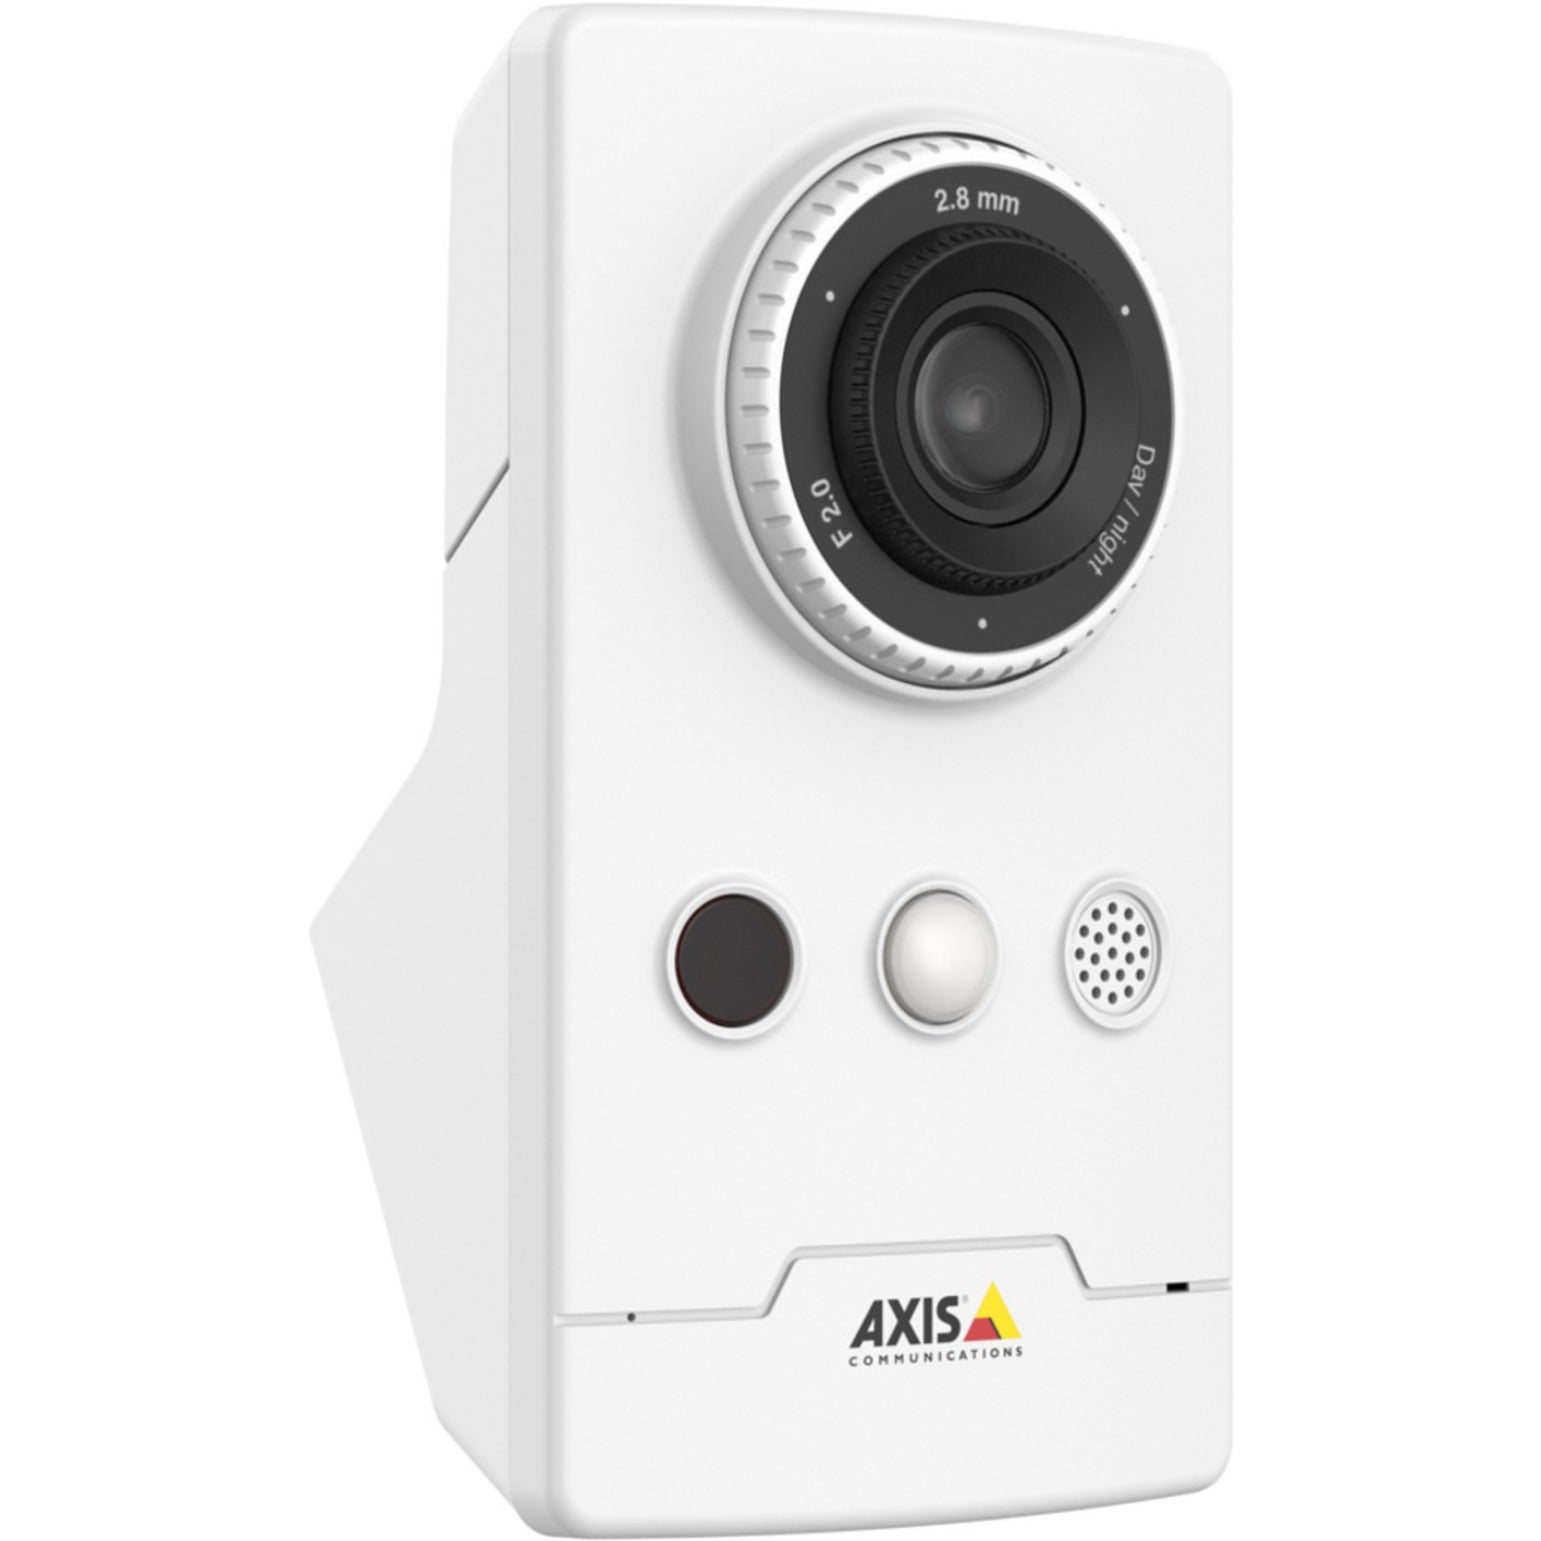 AXIS 0810-004 M1065-LW Full-featured Wireless HDTV 1080p Camera Monochrome Color TAA Compliant